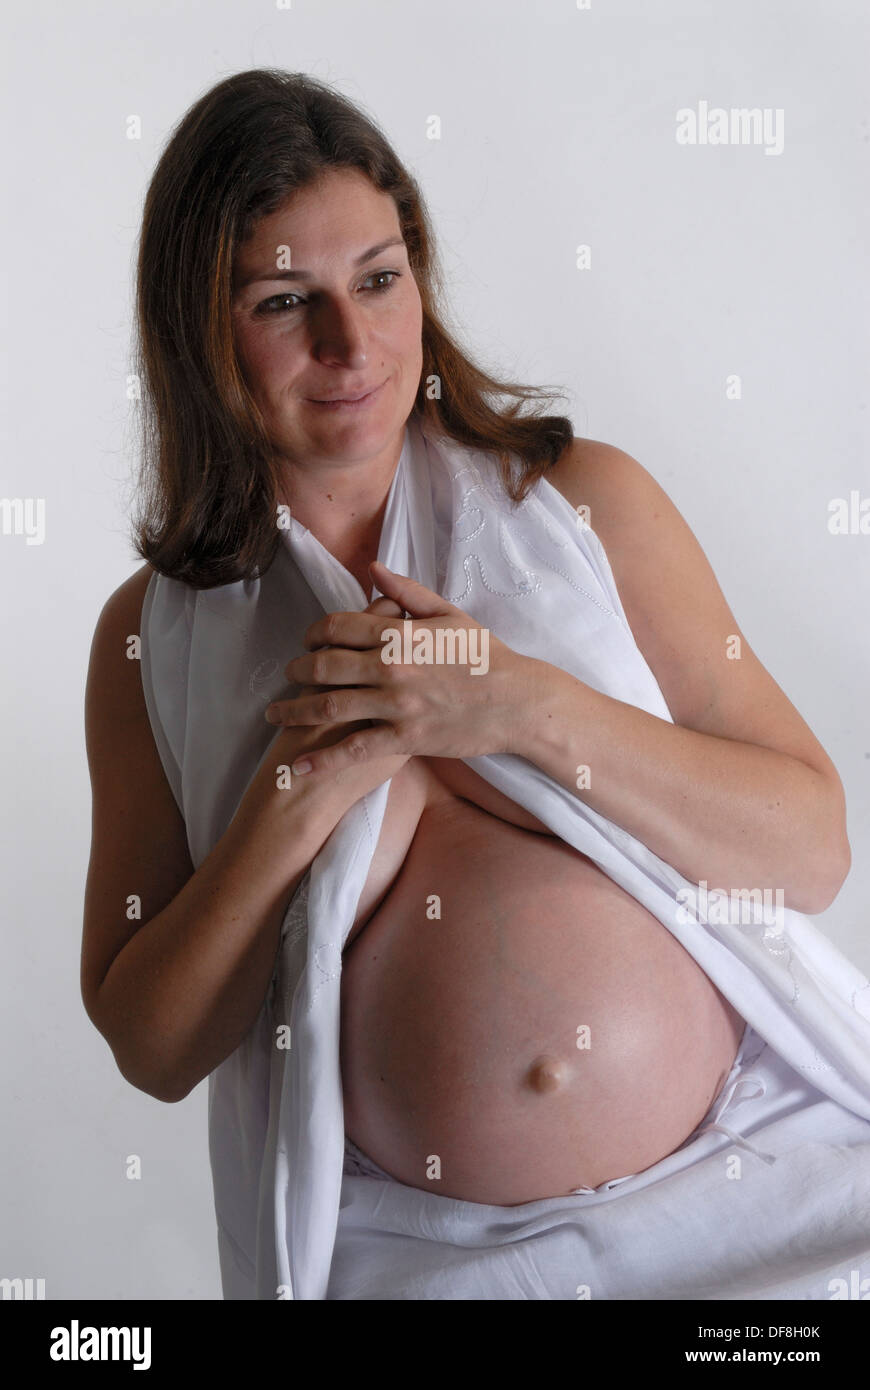 Woman pregnant with twins Stock Photo